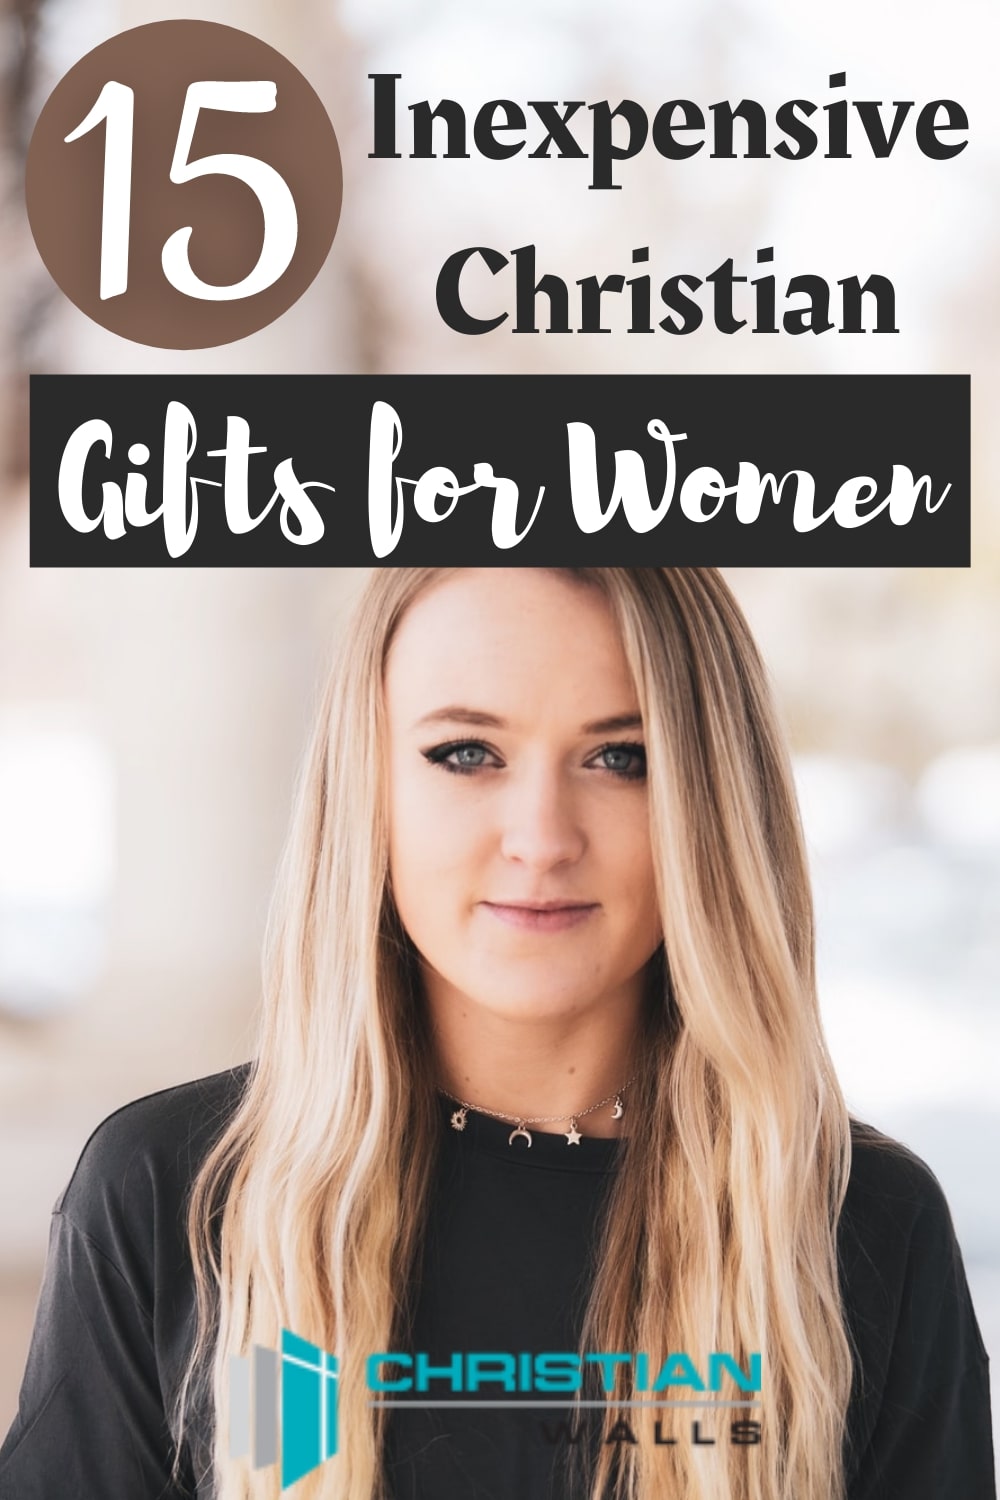 15 Inexpensive Christian gifts for Women (Low Cost Ideas